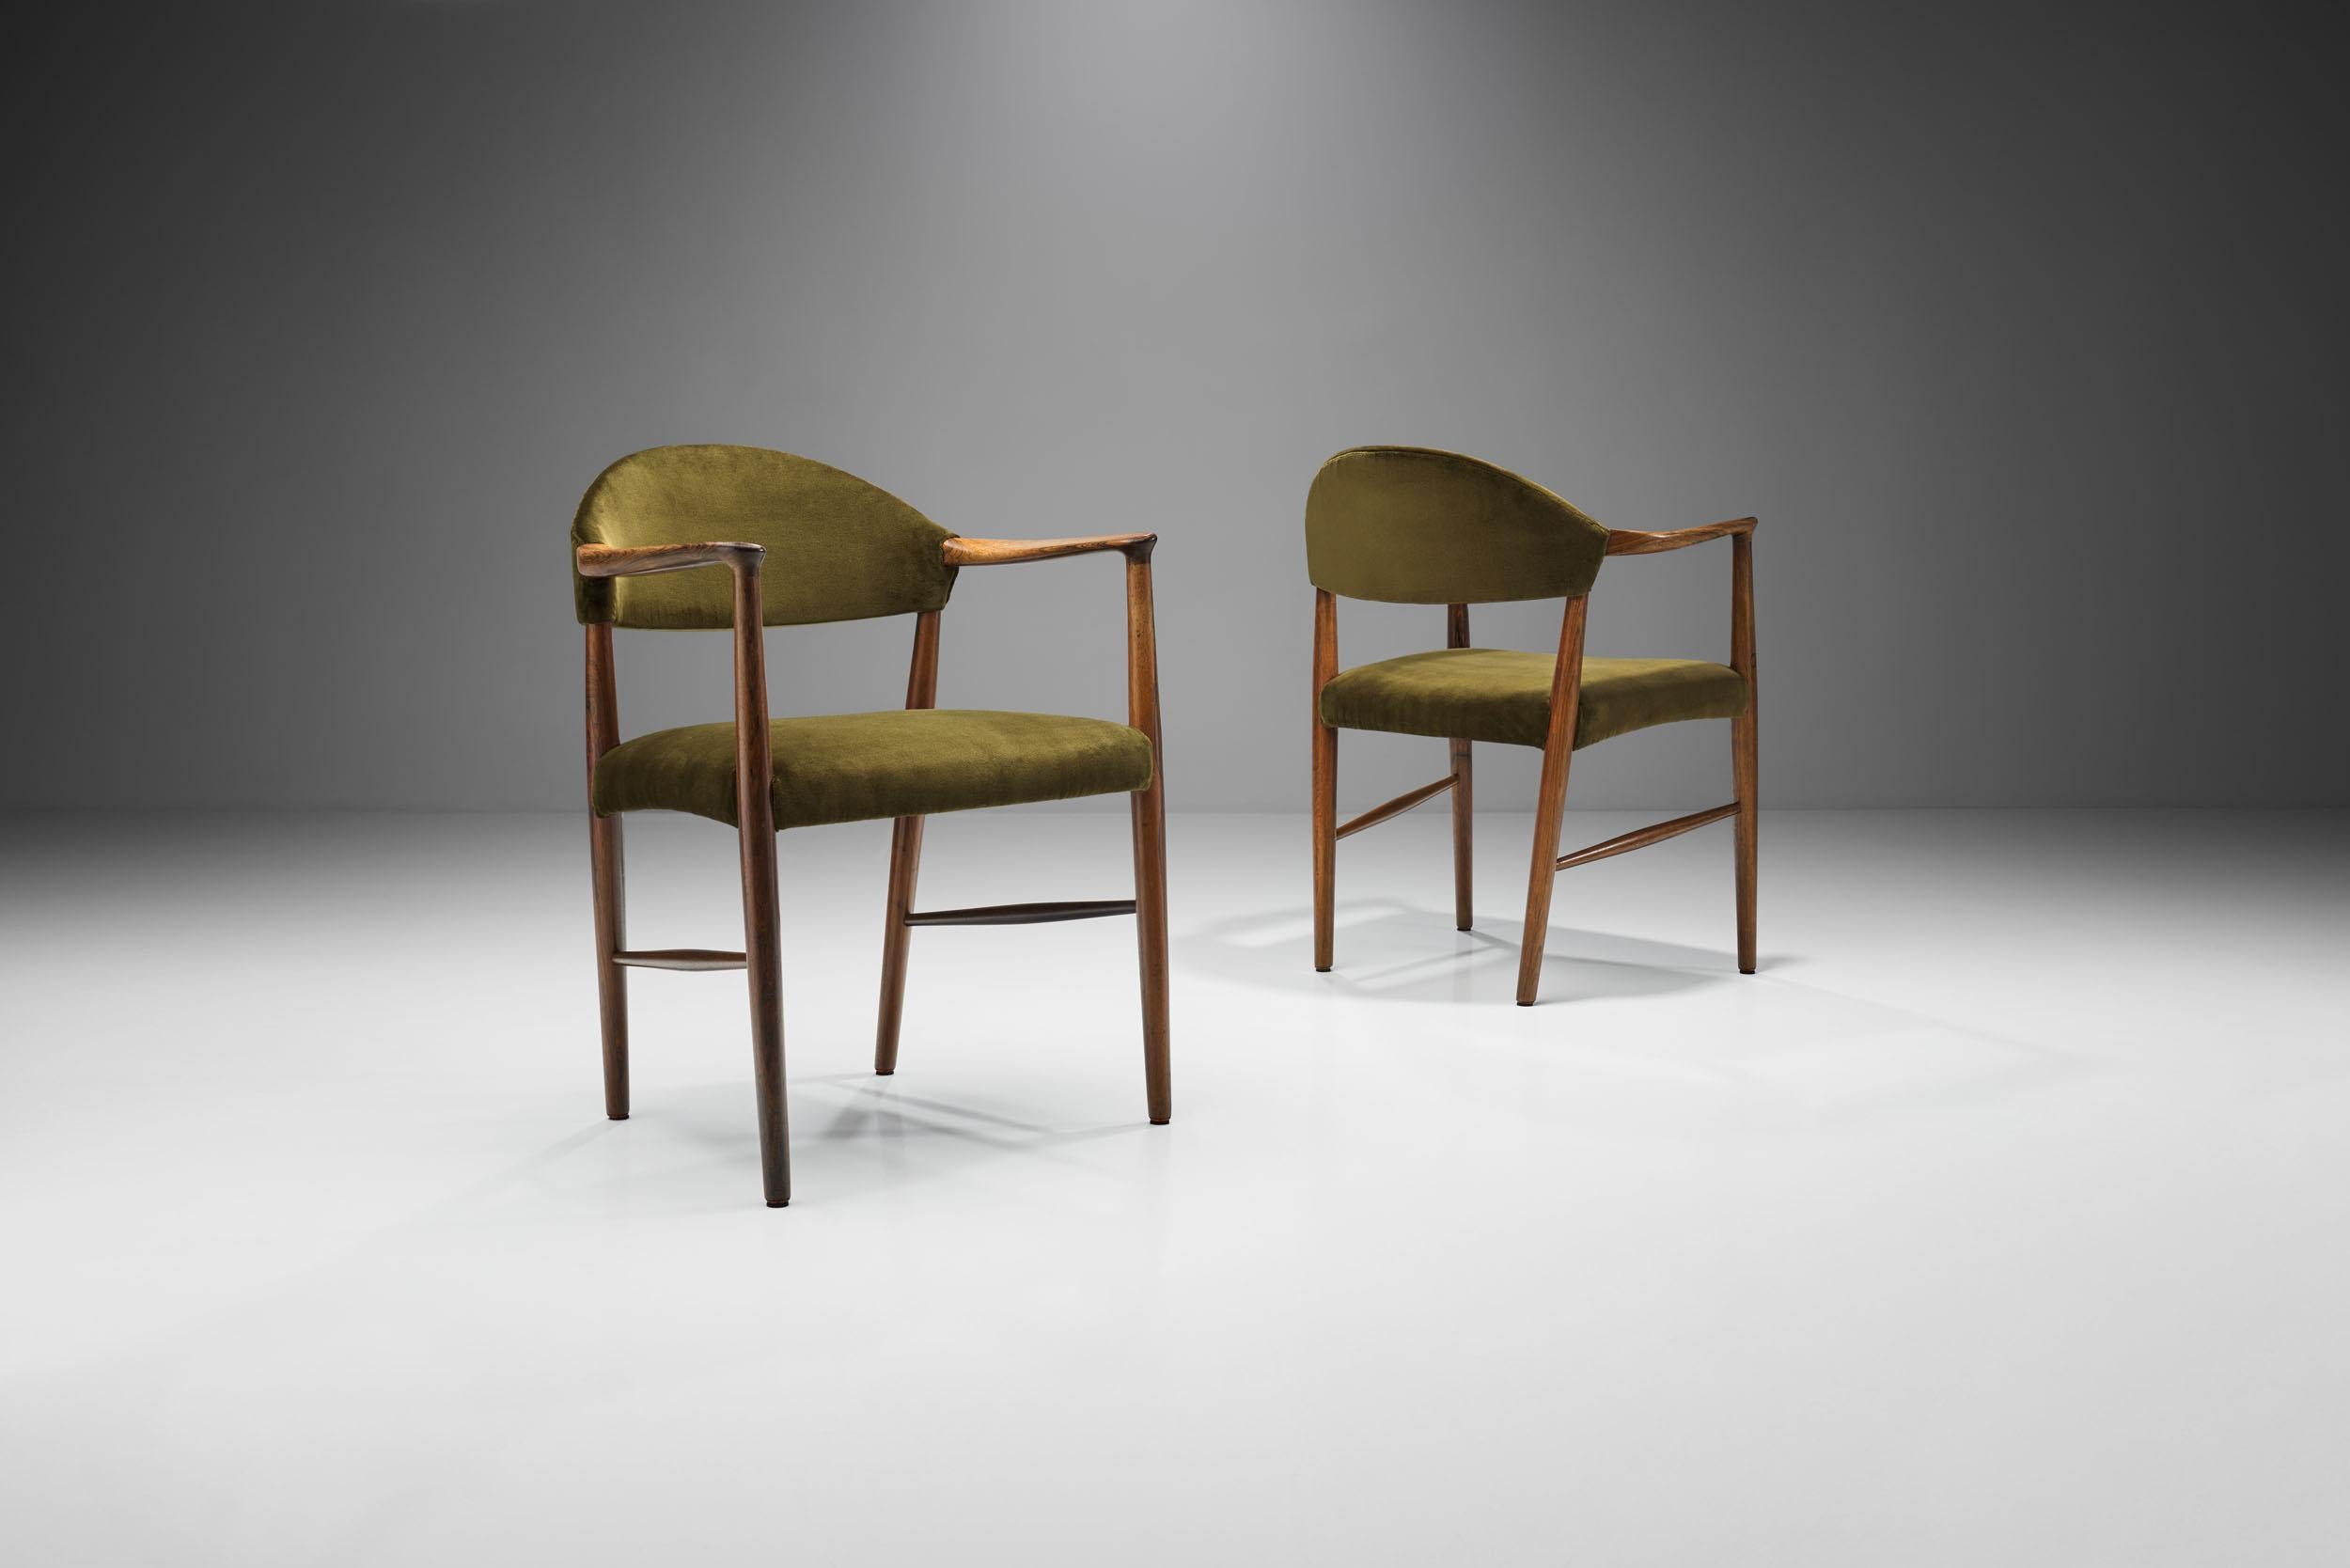 This pair of “Model 223” armchairs are Classic examples of midcentury Scandinavian design. The design is timeless and modern with great attention to quality and function.

The Danish designer, Kurt Olsen is known as a furniture architect who liked